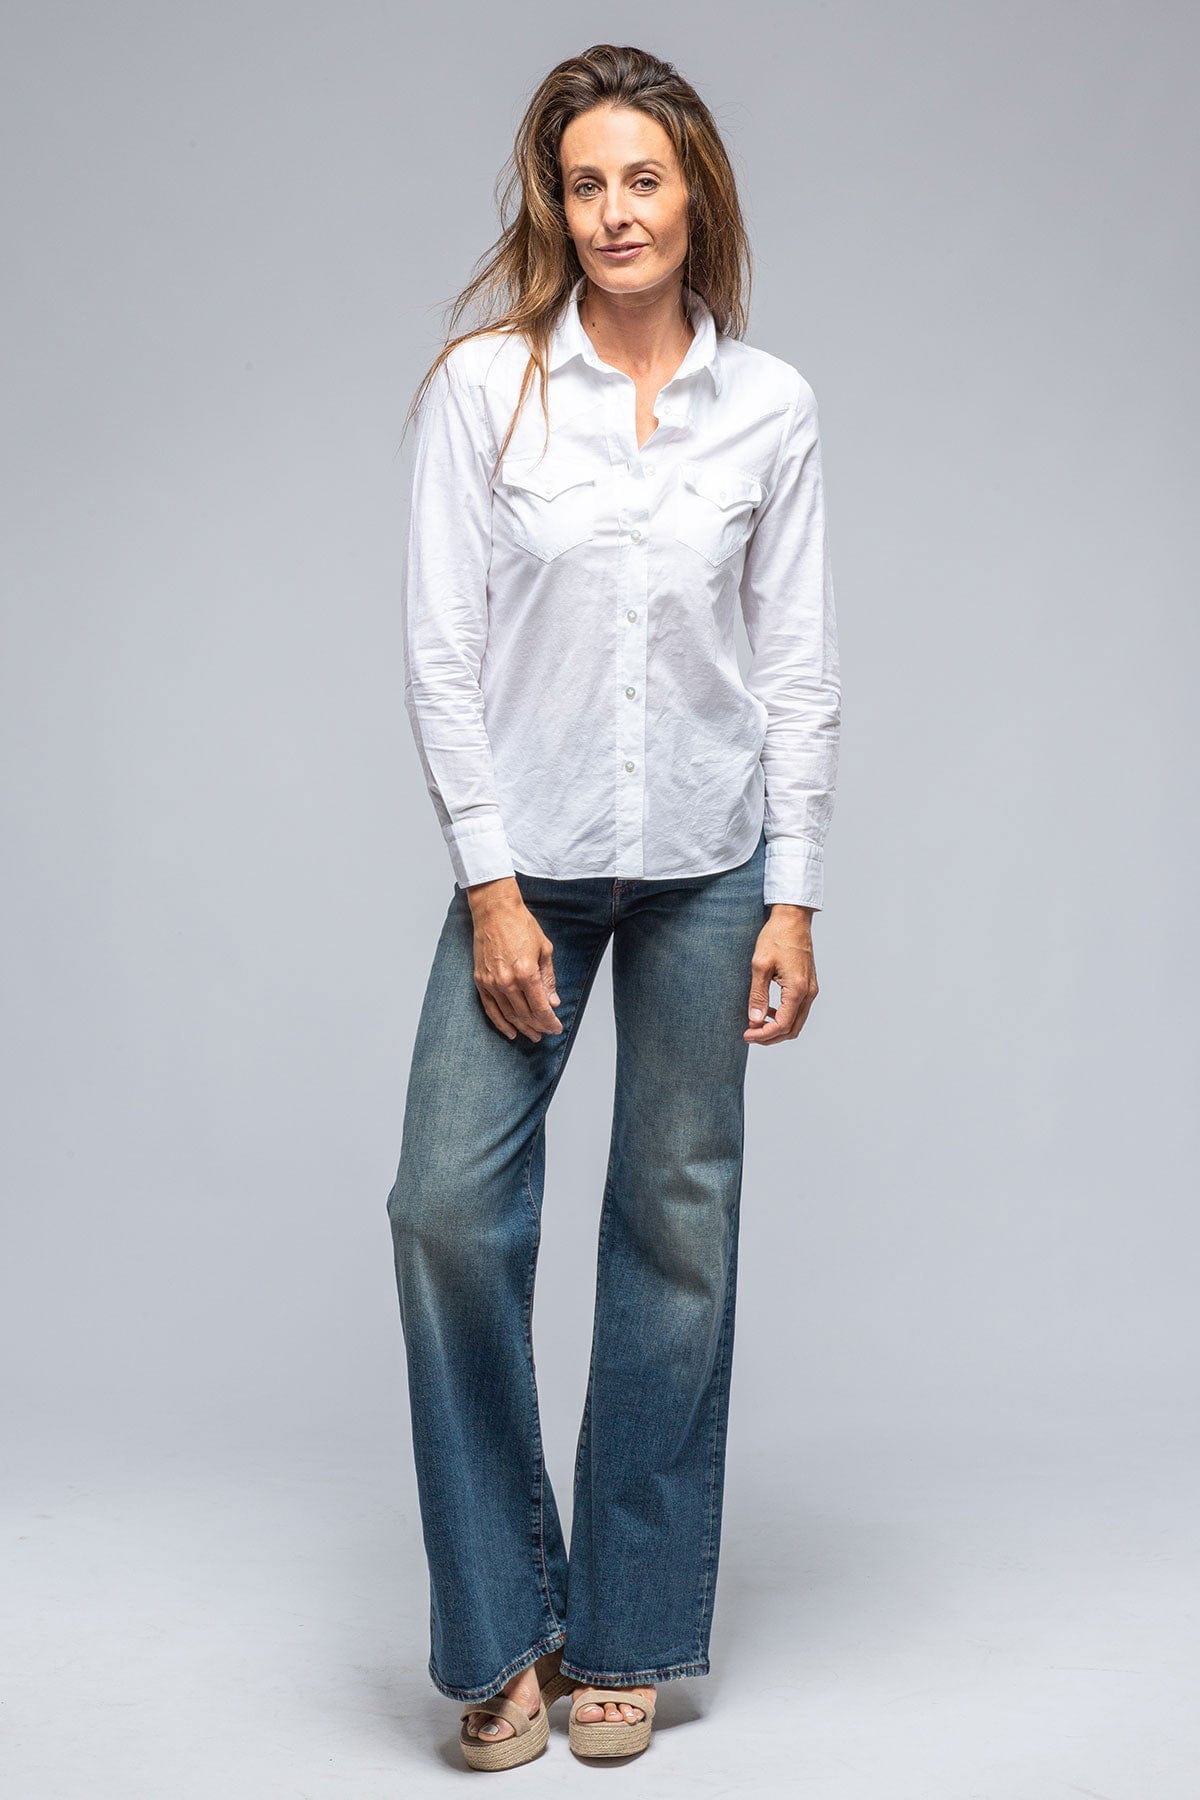 Marcella Linen Shirt in White - AXEL'S